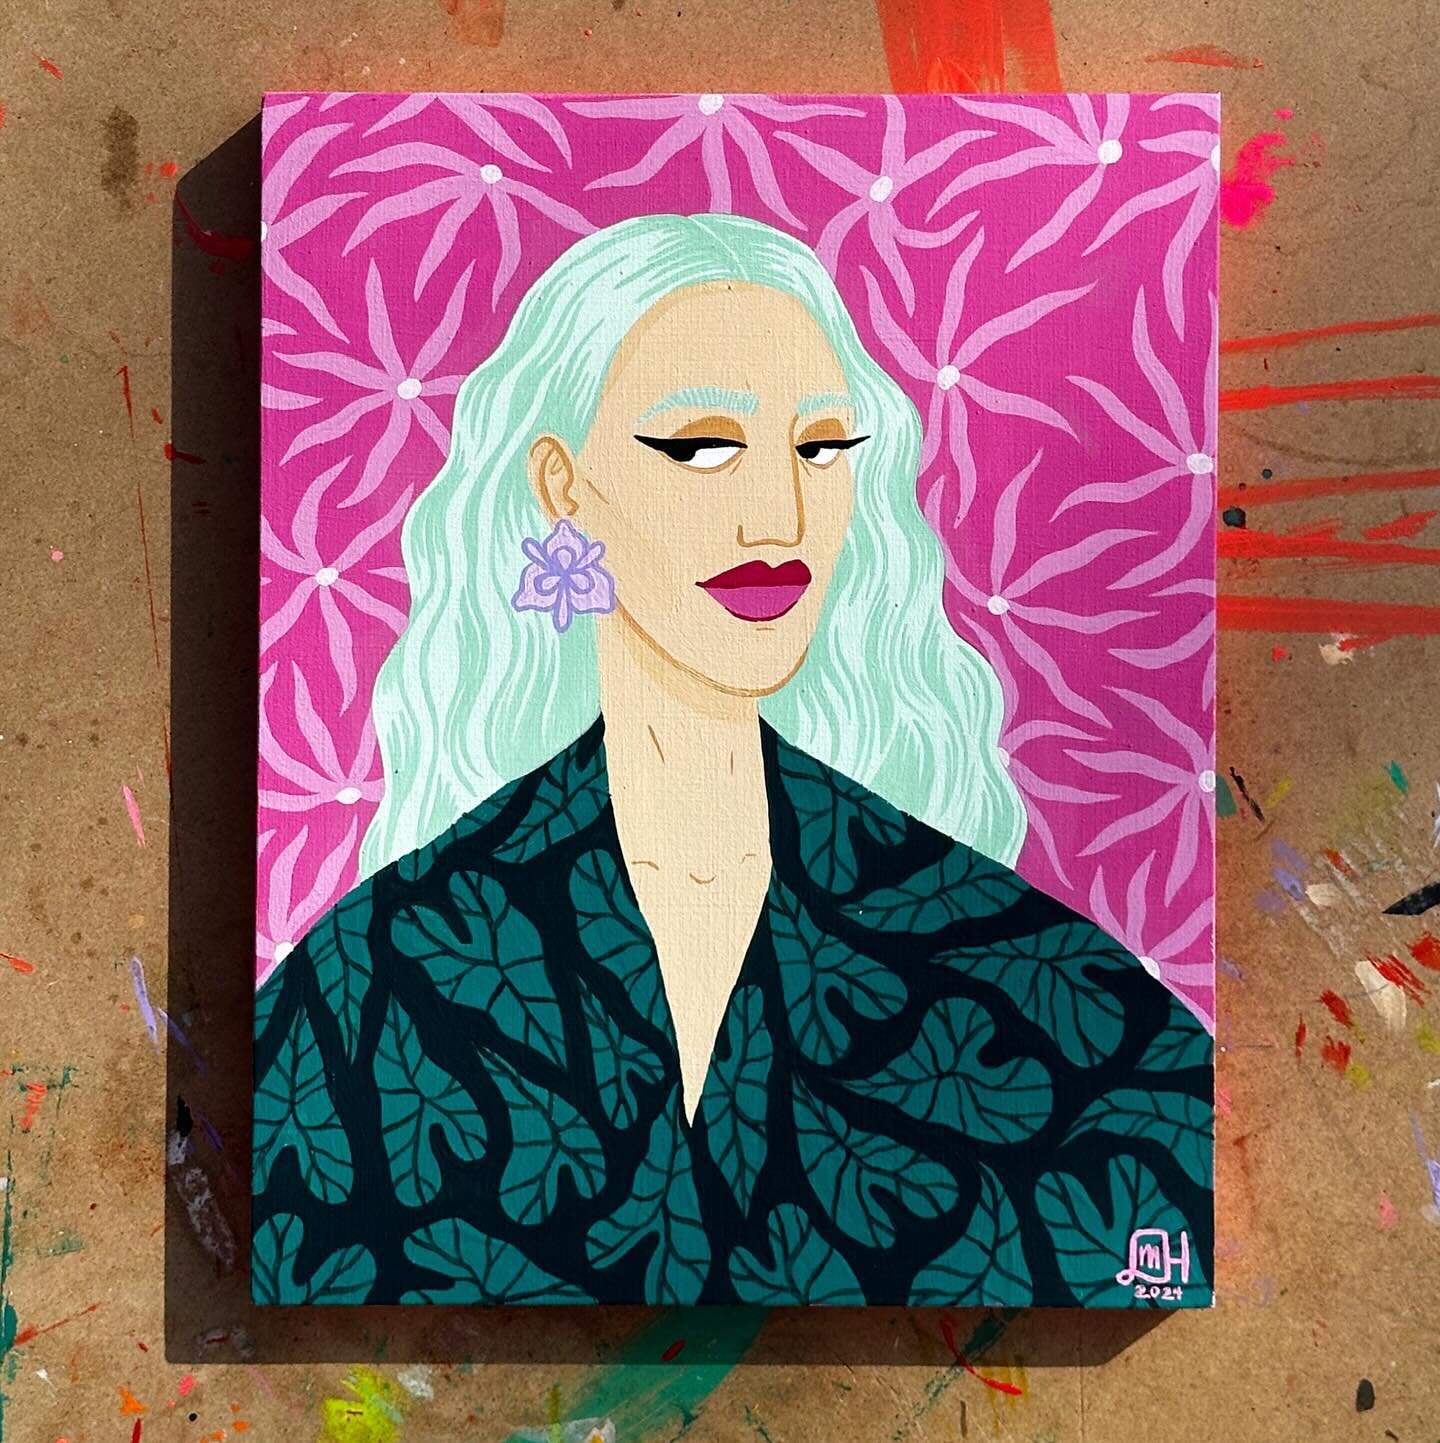 💚💖 Been playing with new colors and techniques lately - this one was a fun one! Binge watched a LOT of Vanderpump Rules while painting it&hellip; 😅 This one will be available during my drop of originals on April 6th! Mark your cals, more info soon